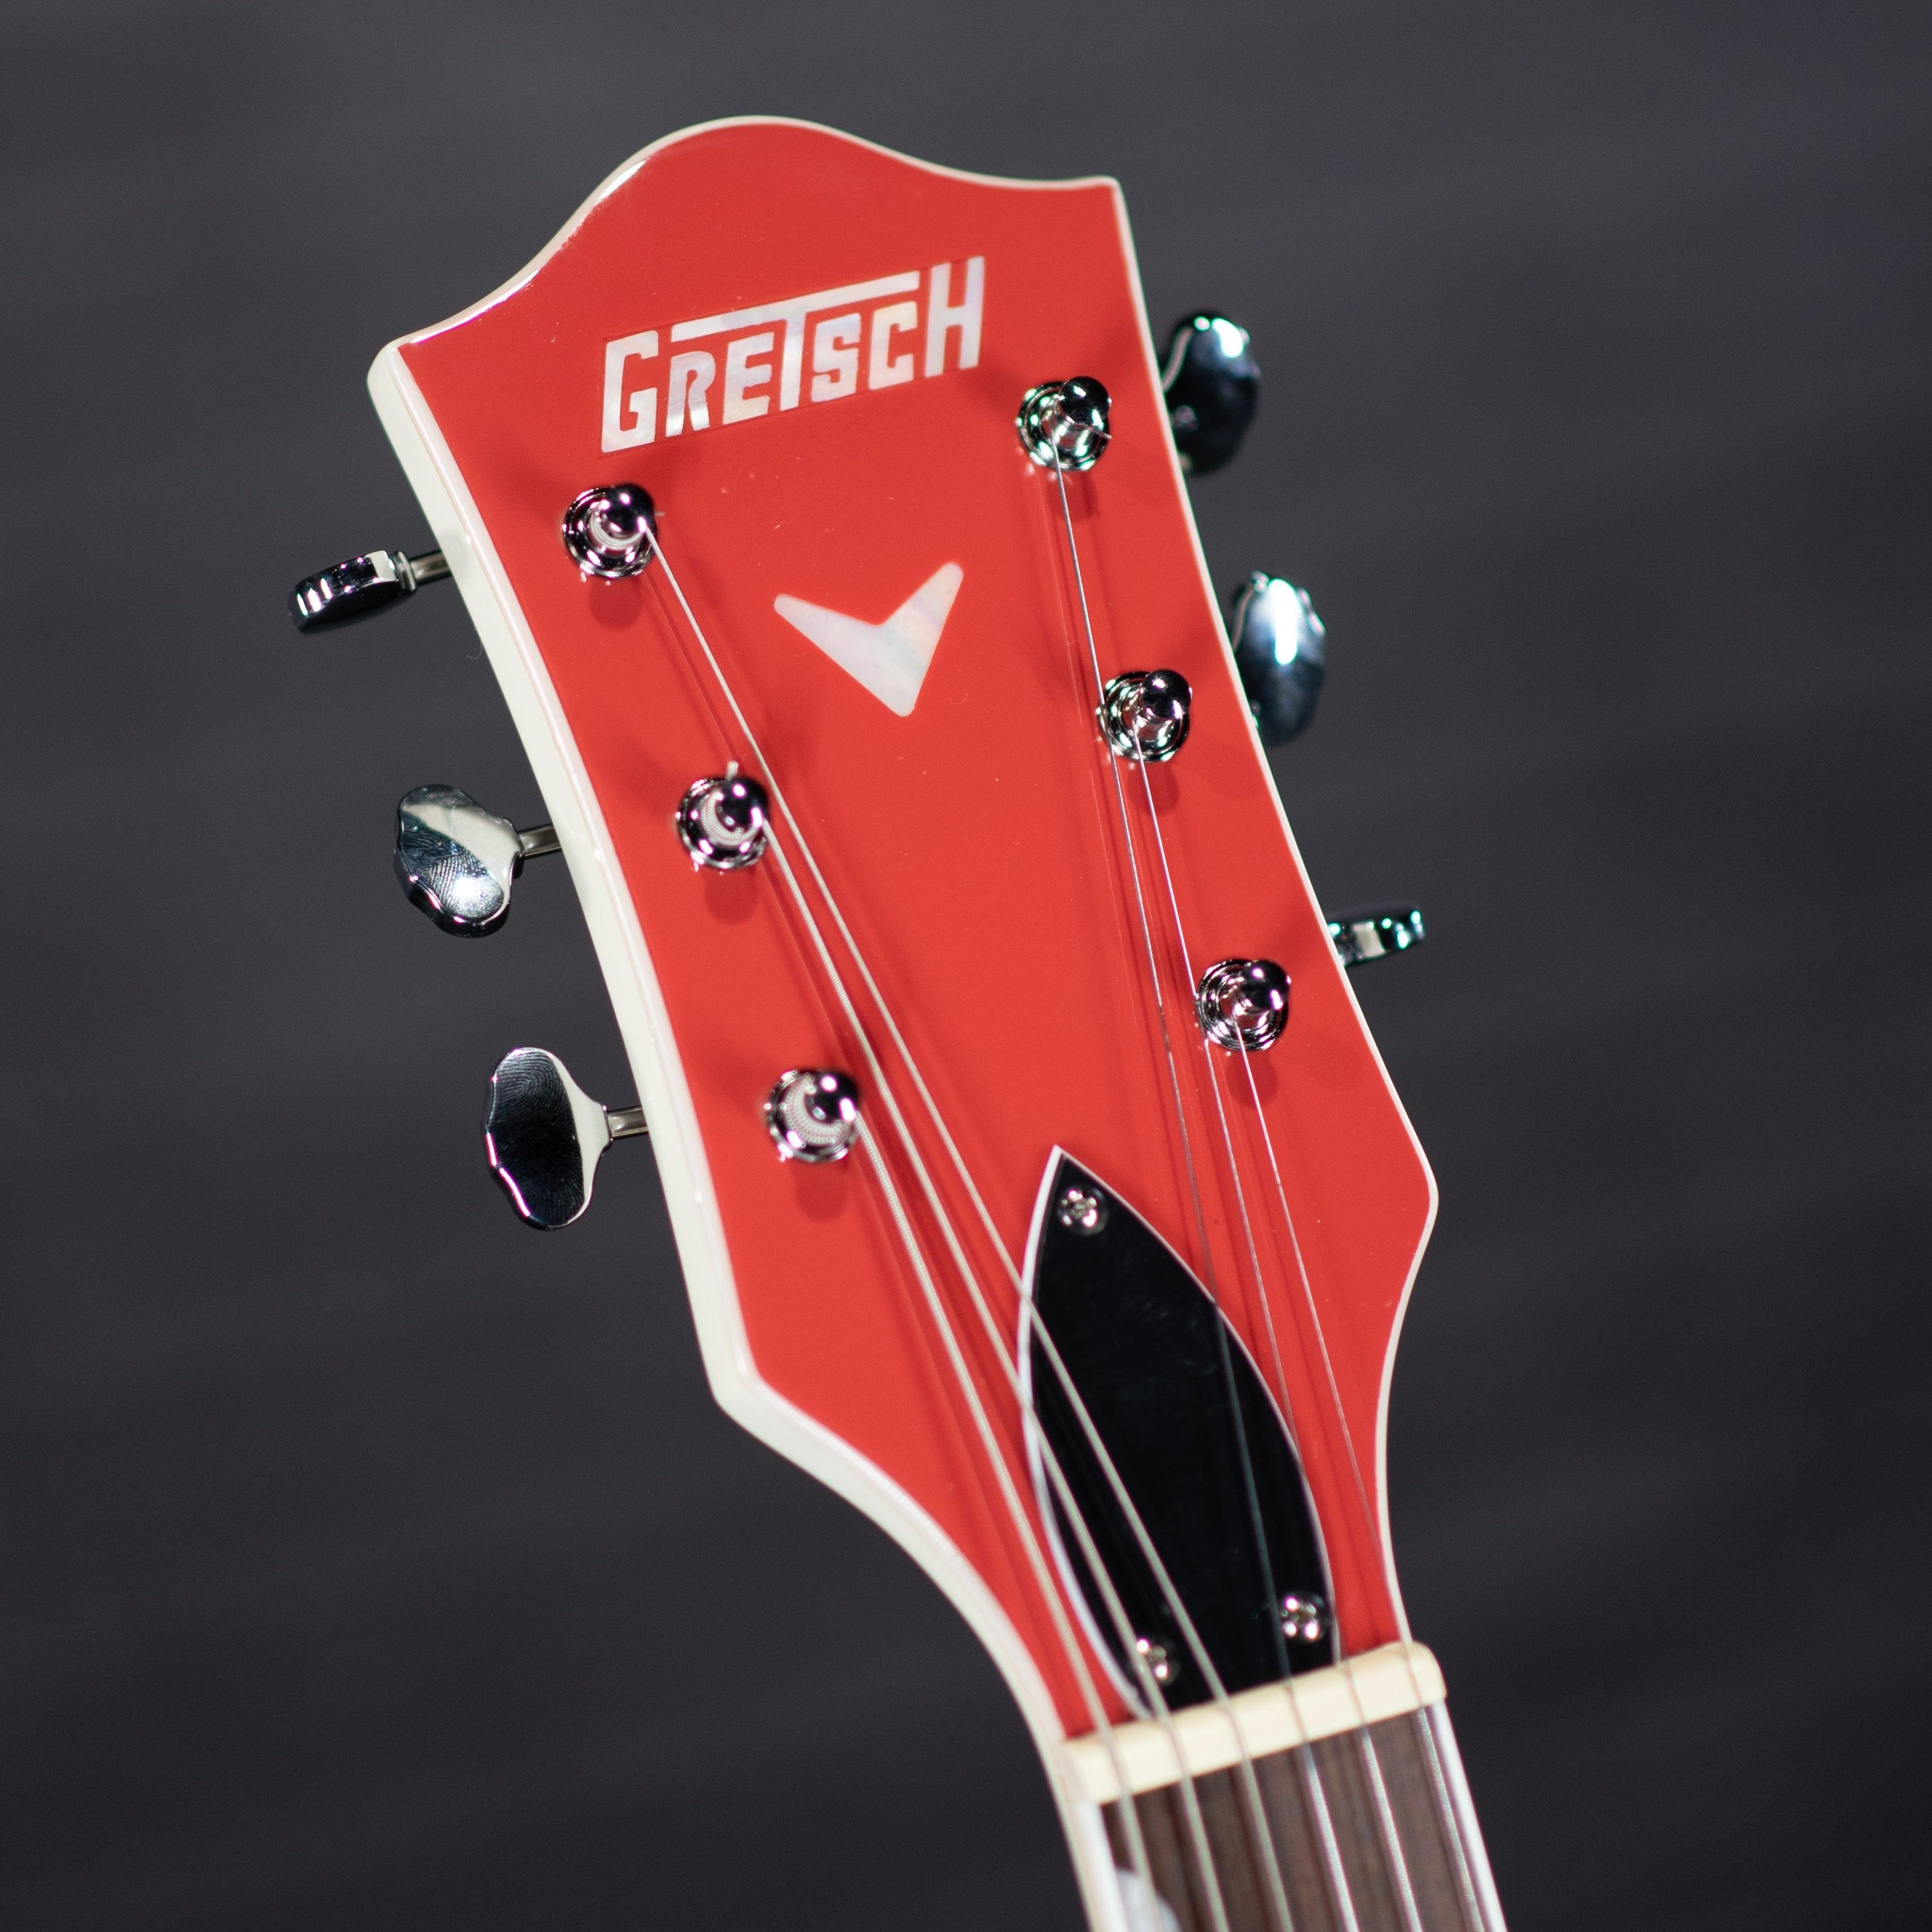 Gretsch 5410T Limited Edition Tri-Five Hollow Body (Fiesta Red/Vintage White) - Impulse Music Co.